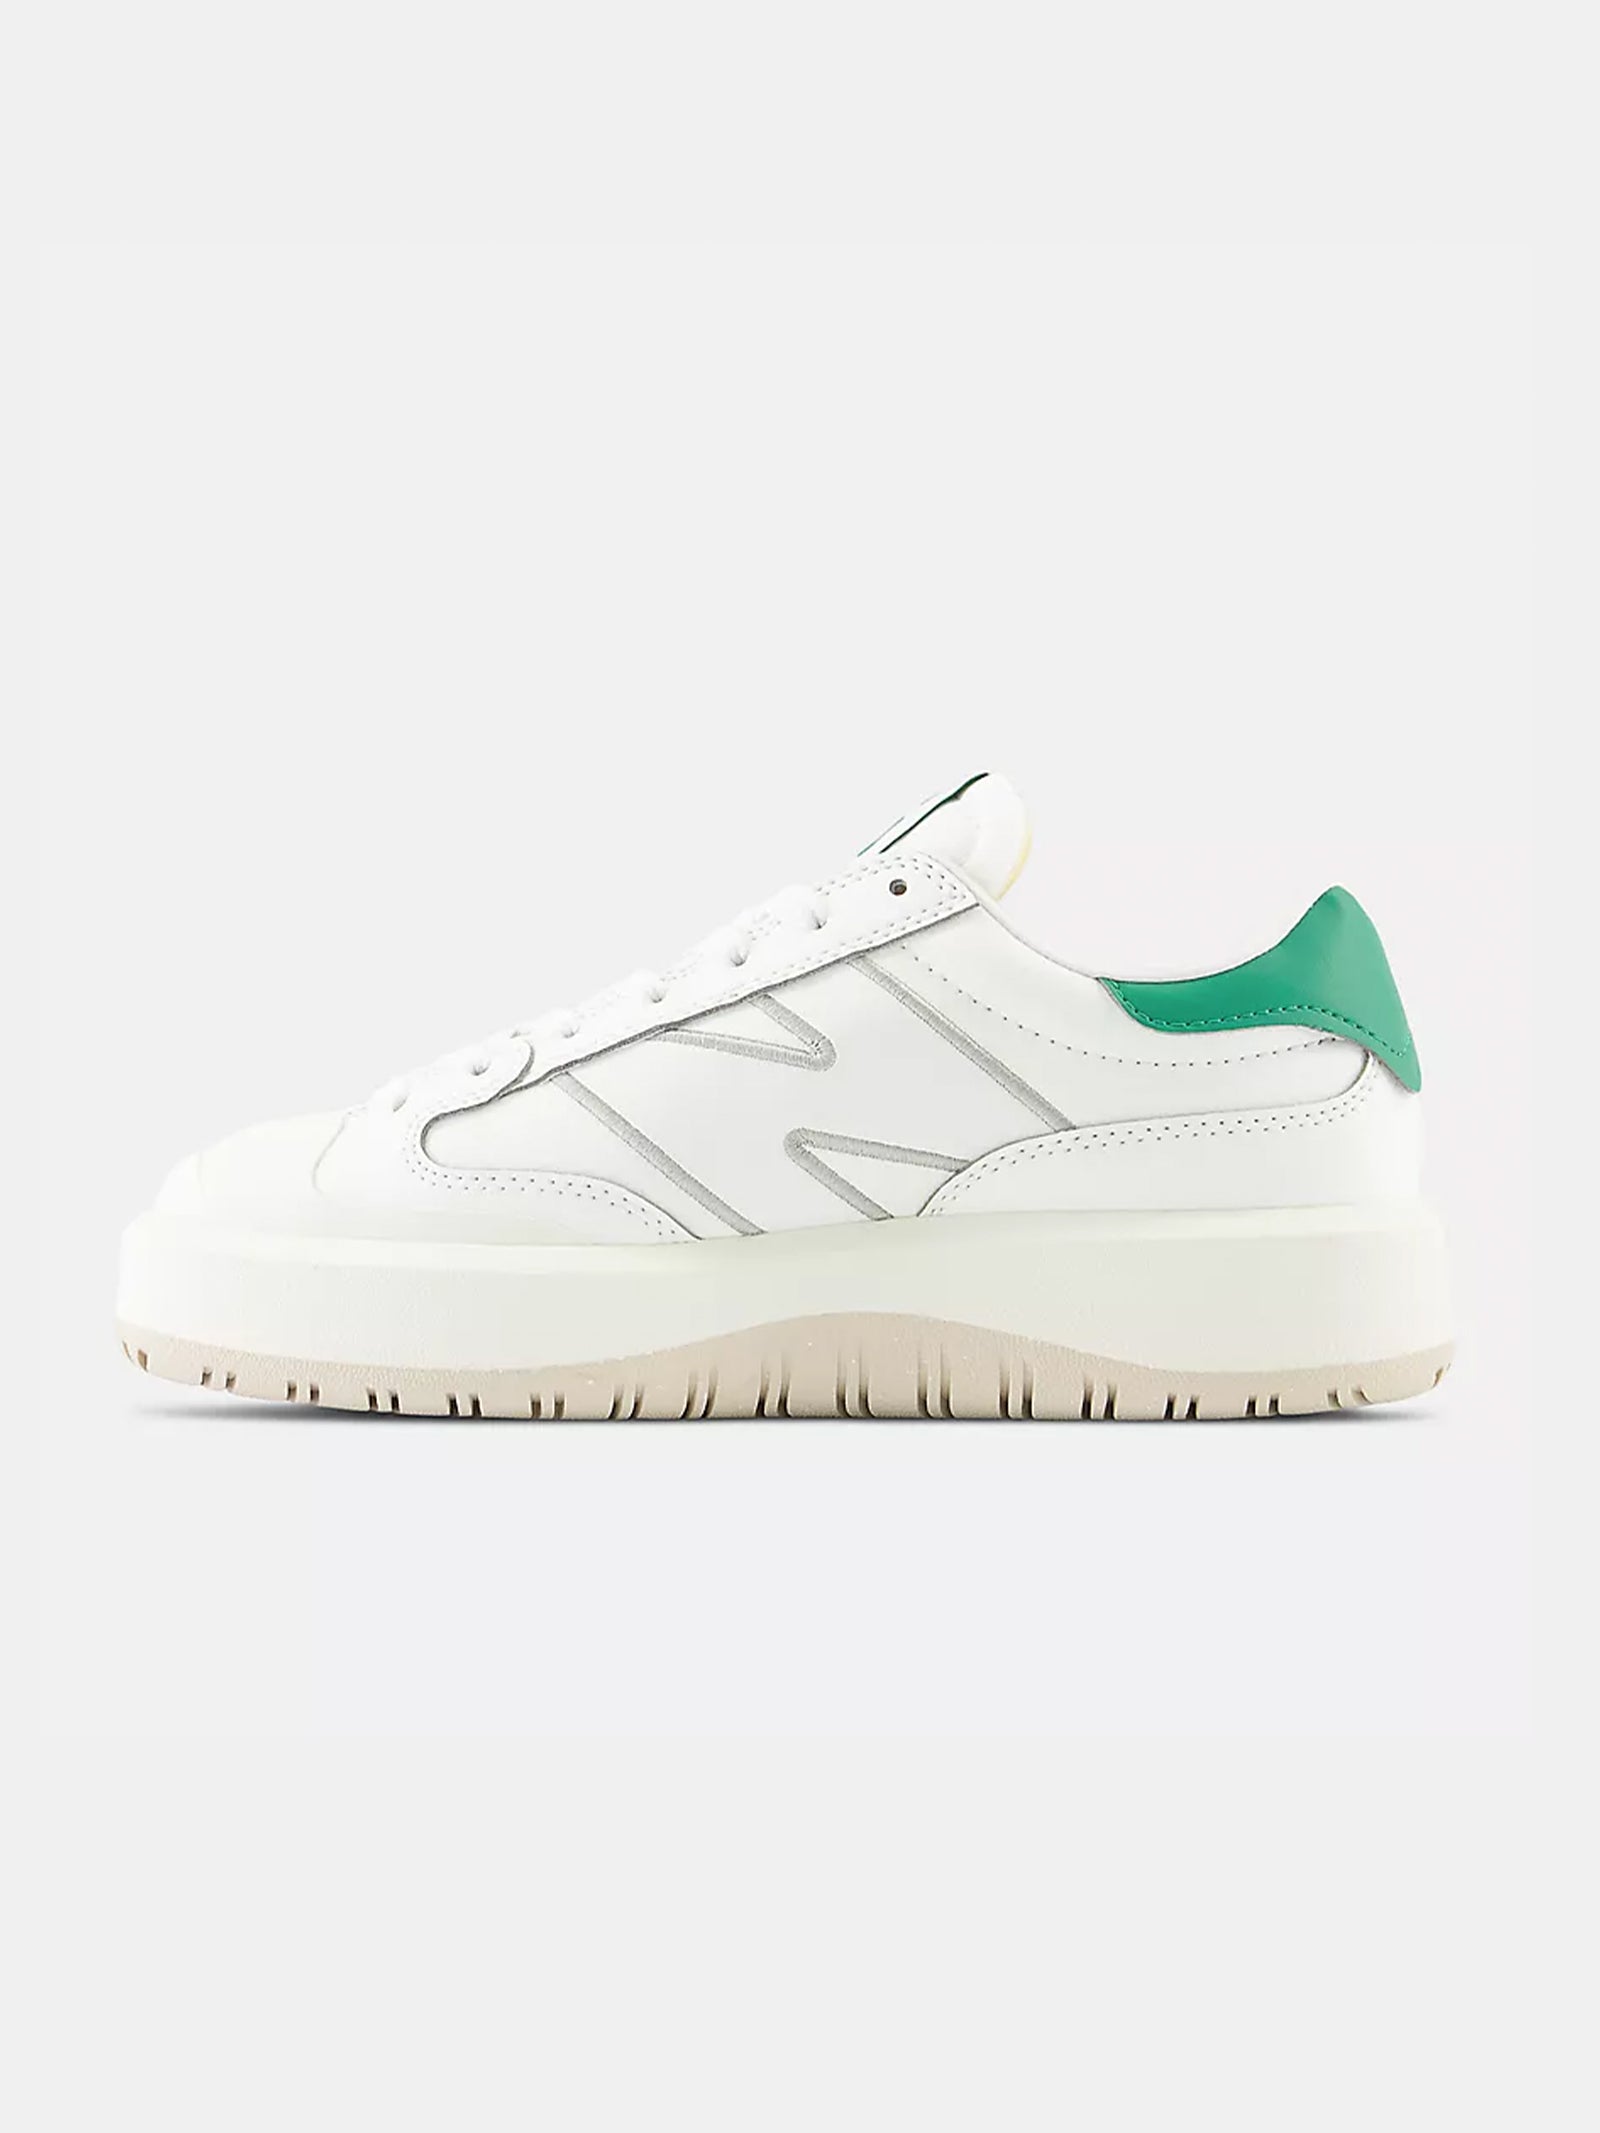 Unisex CT302 Sneakers in White & Green